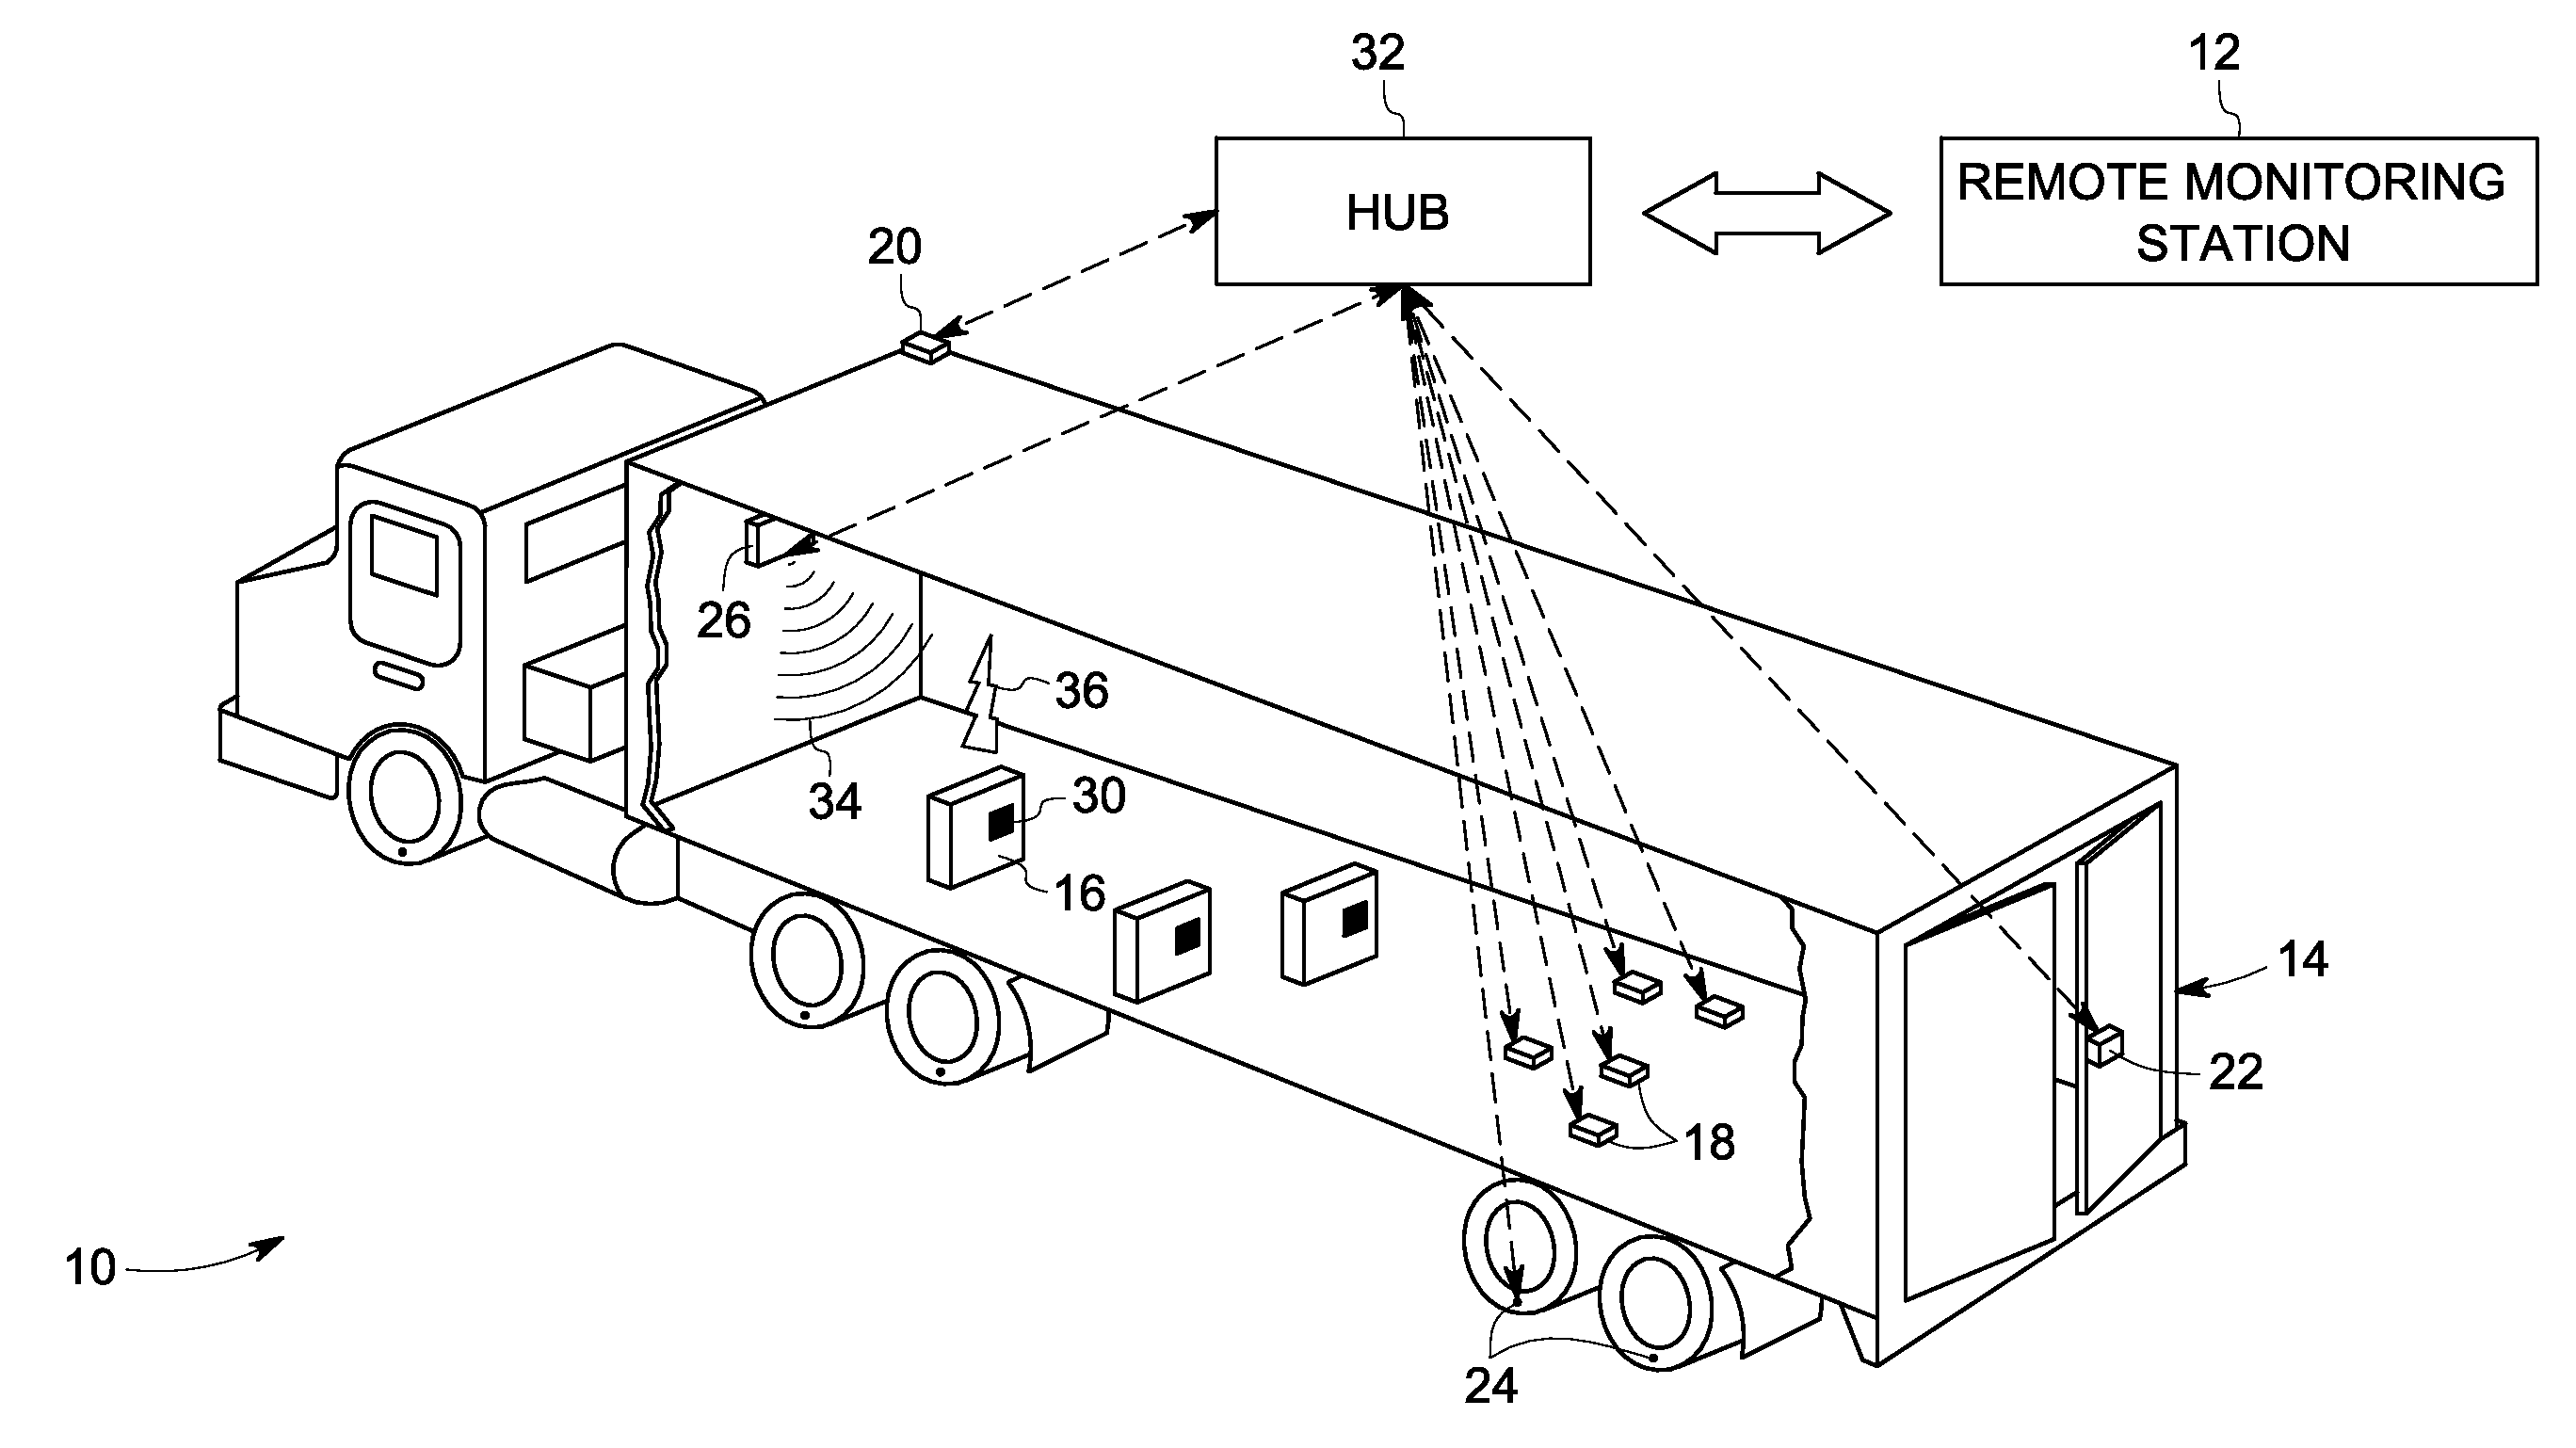 System and method for monitoring and tracking inventories